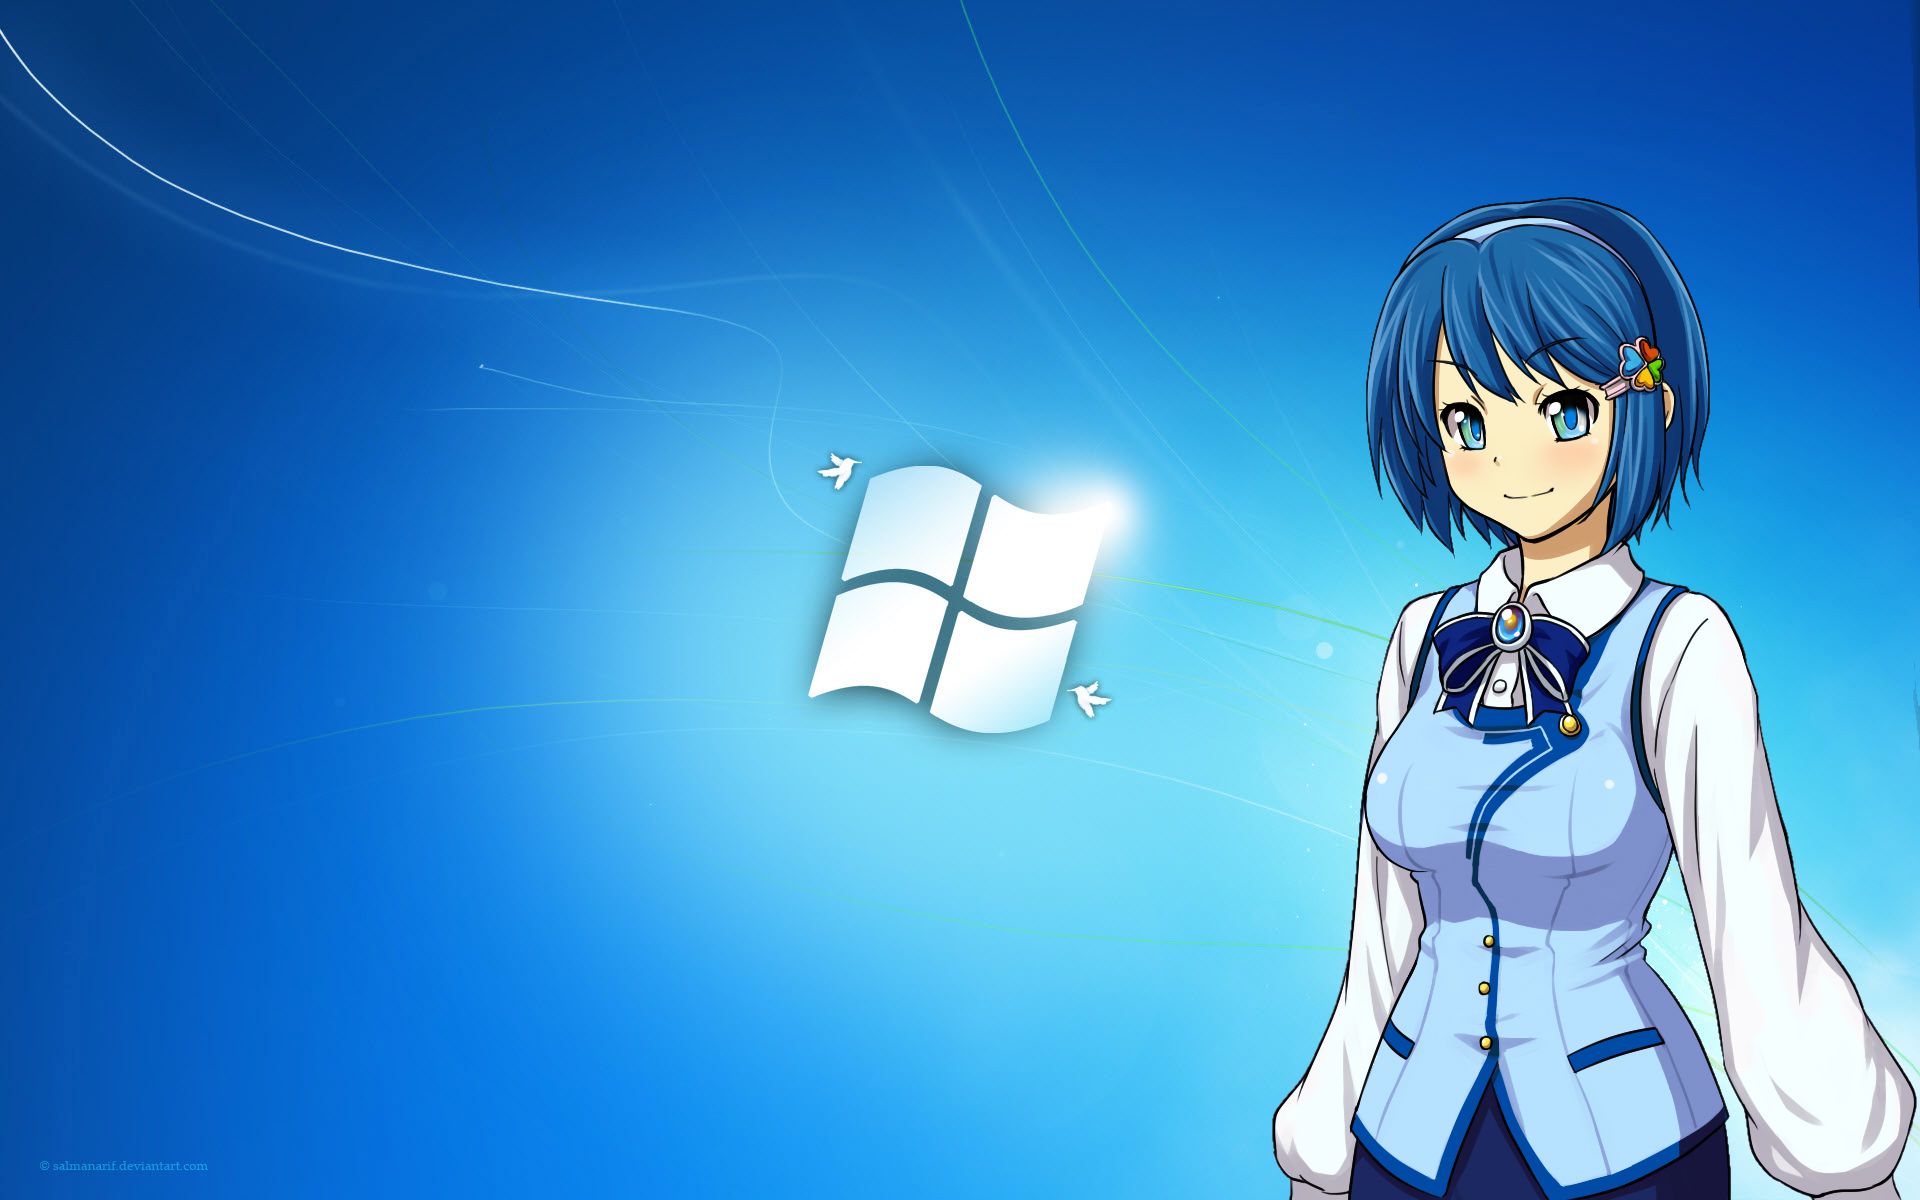 Windows 10 Anime Wallpapers - Wallpaper Cave